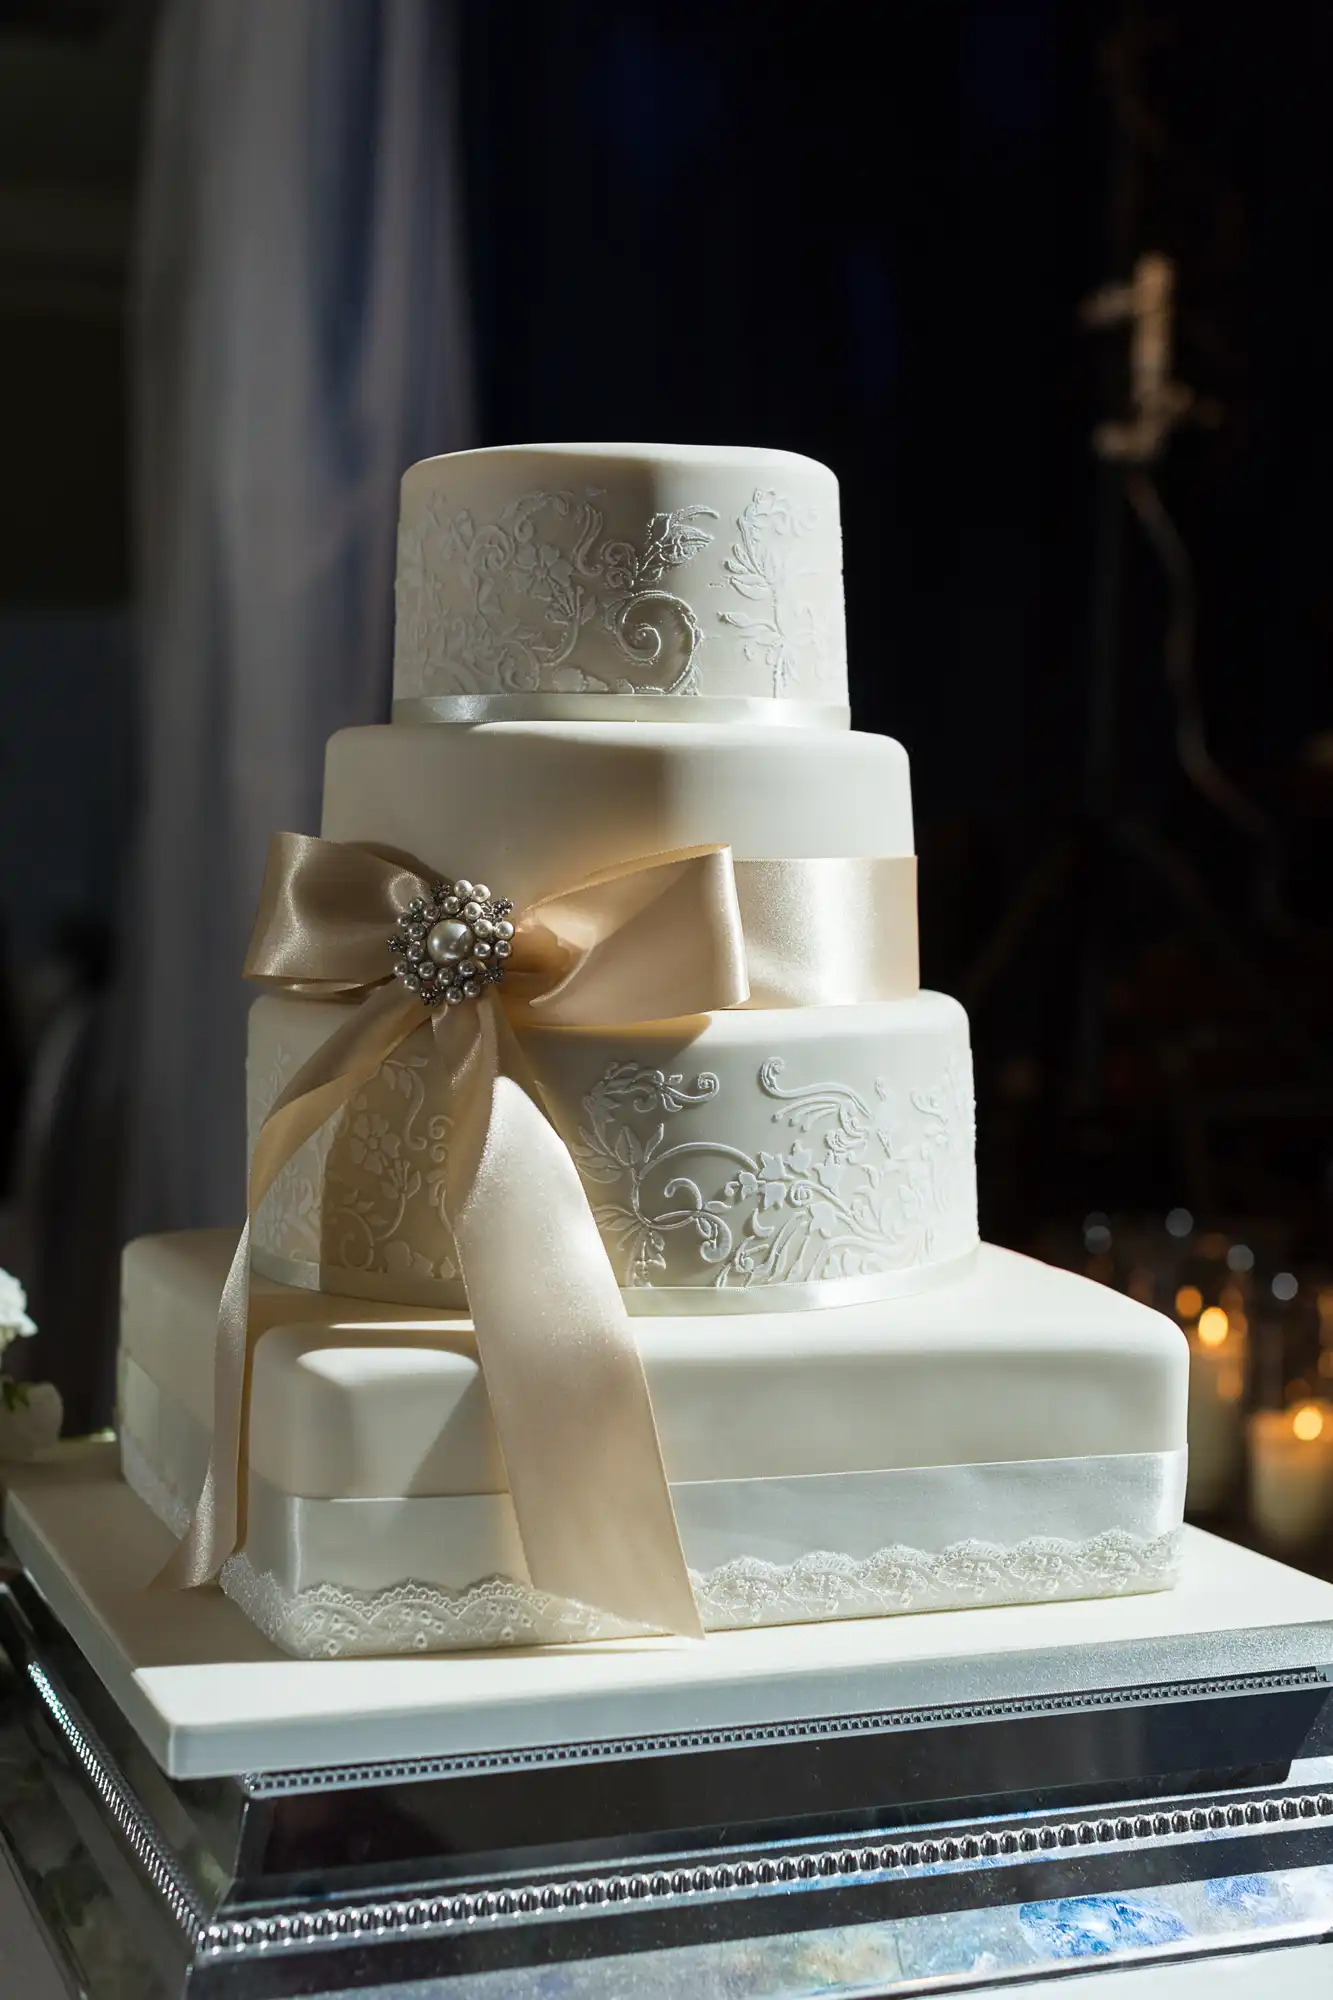 A four-tiered white wedding cake decorated with ornate patterns and a satin ribbon, topped with a jeweled brooch, displayed on a silver stand.